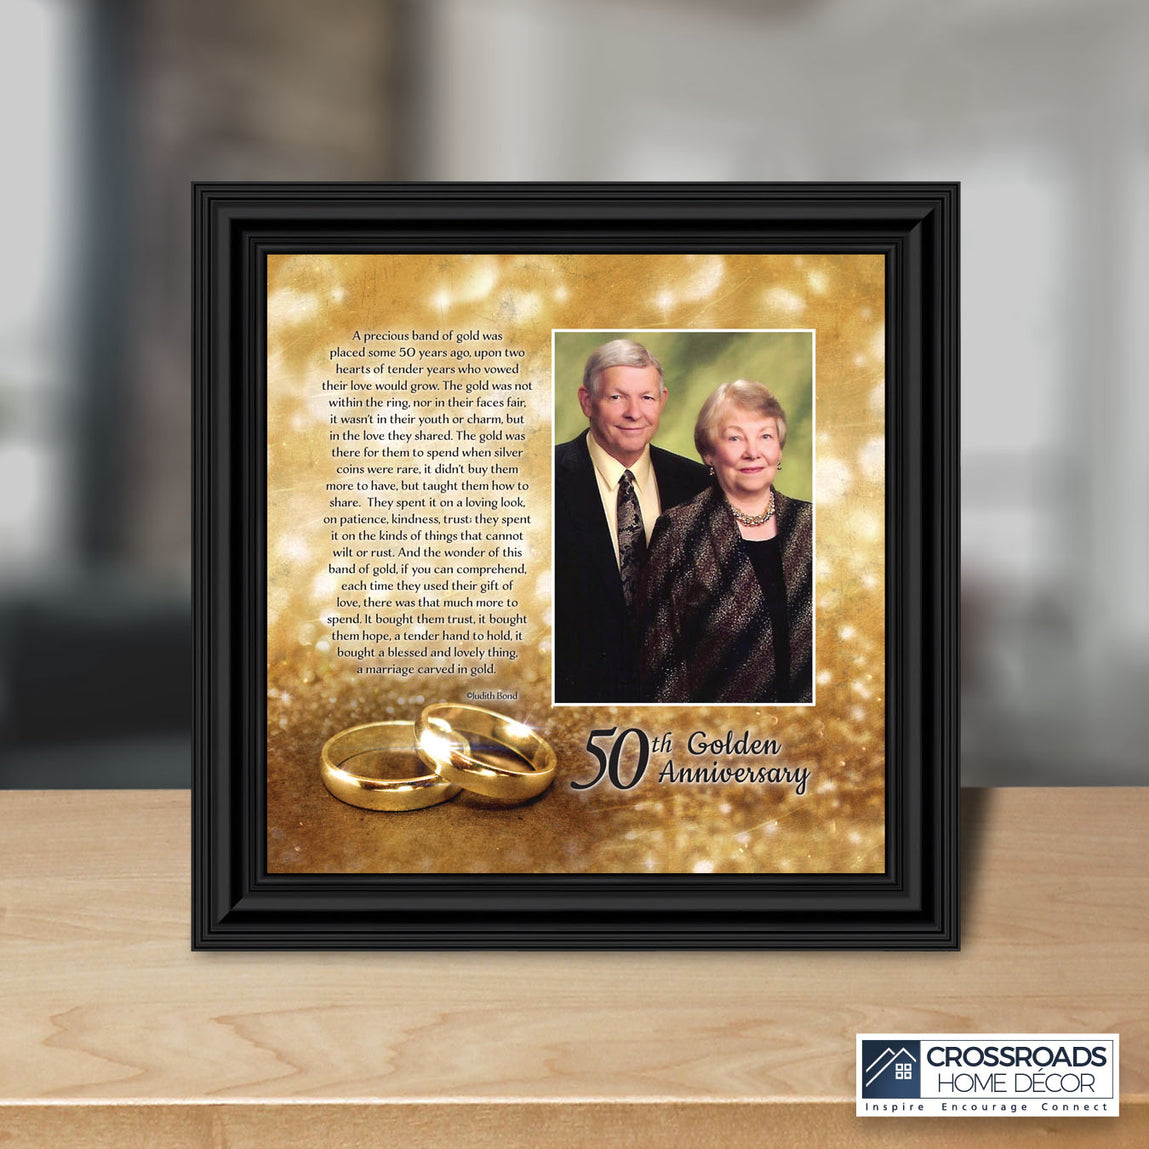 Happy Wedding Anniversary Card with Gold Frame and Hearts. Parents